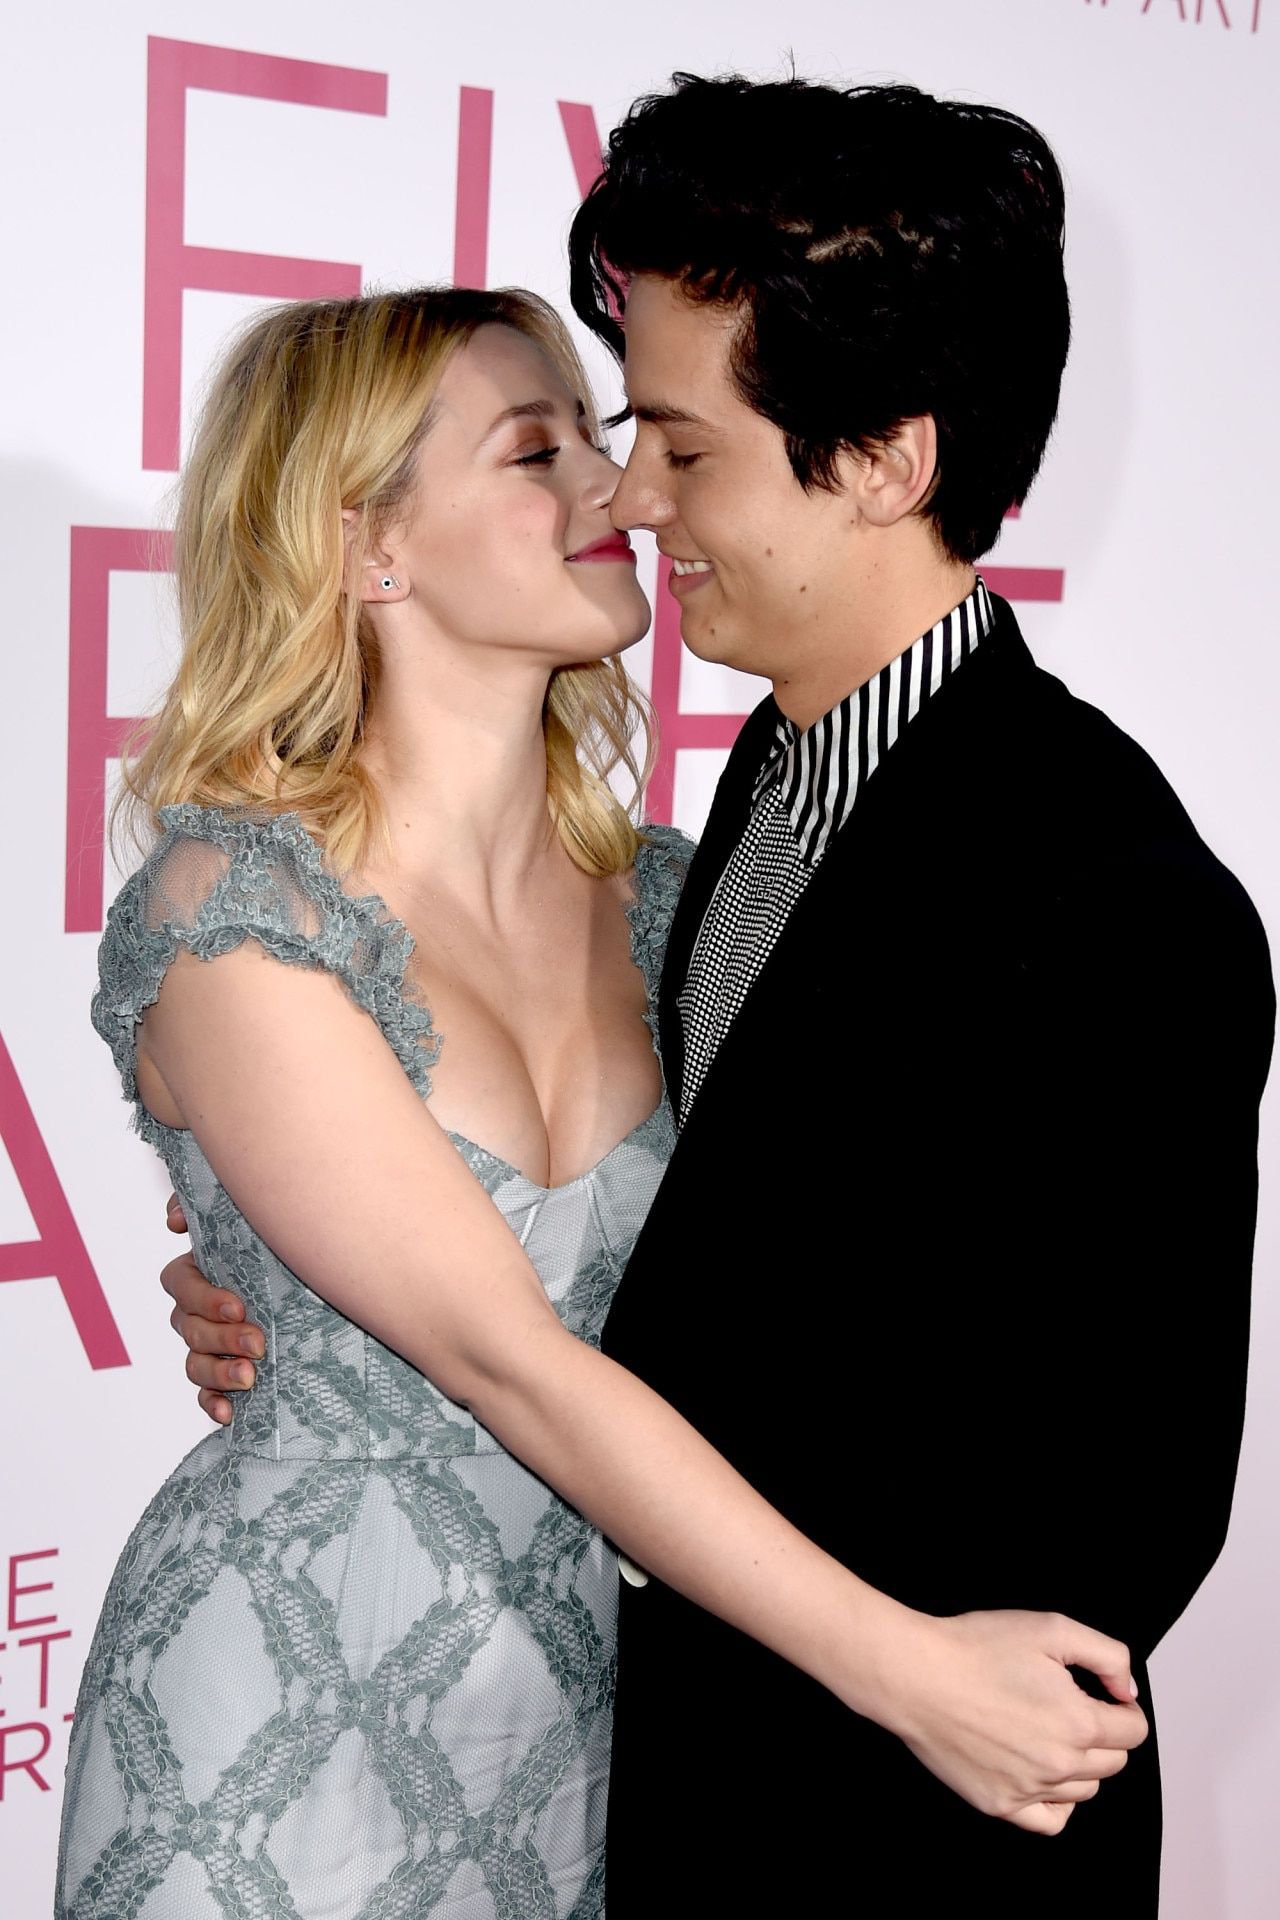 Lili Reinhart publicly declared her love for Cole Sprouse on his